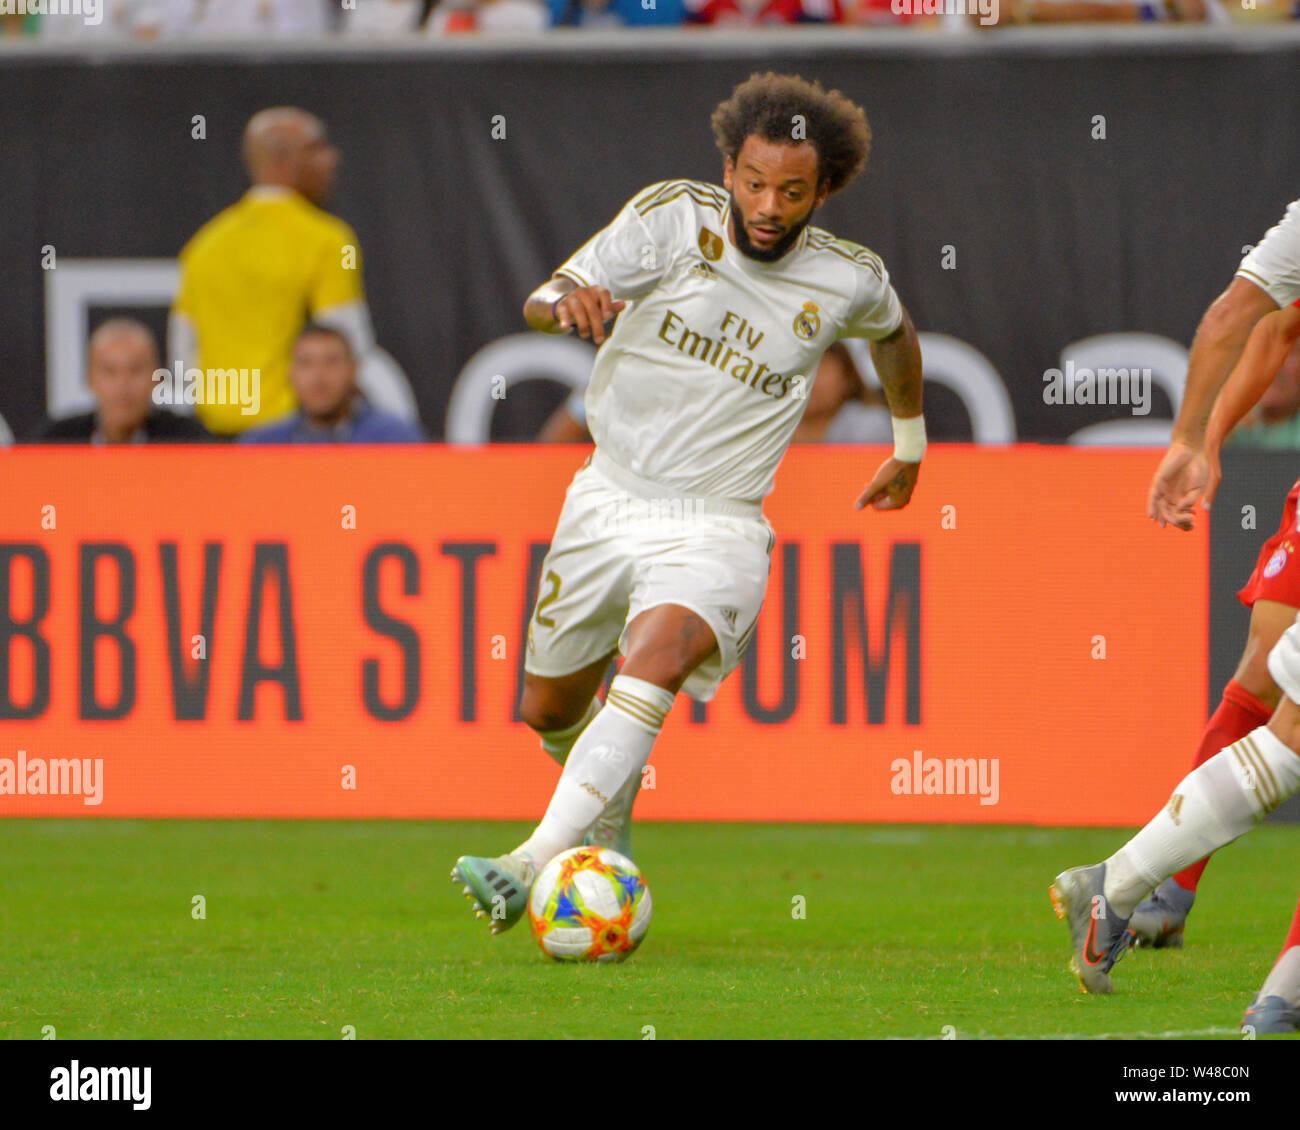 Houston, TX, USA. 20th July, 2019. Real Madrid defender, Marcelo Vieira (12), moves the ball downfield during the 2019 International Champions Cup match between Real Madrid and FC Bayern, at NRG Stadium in Houston, TX. FC Bayern defeated Real Madrid, 3-1. Mandatory Credit: Kevin Langley/Sports South Media/CSM/Alamy Live News Stock Photo